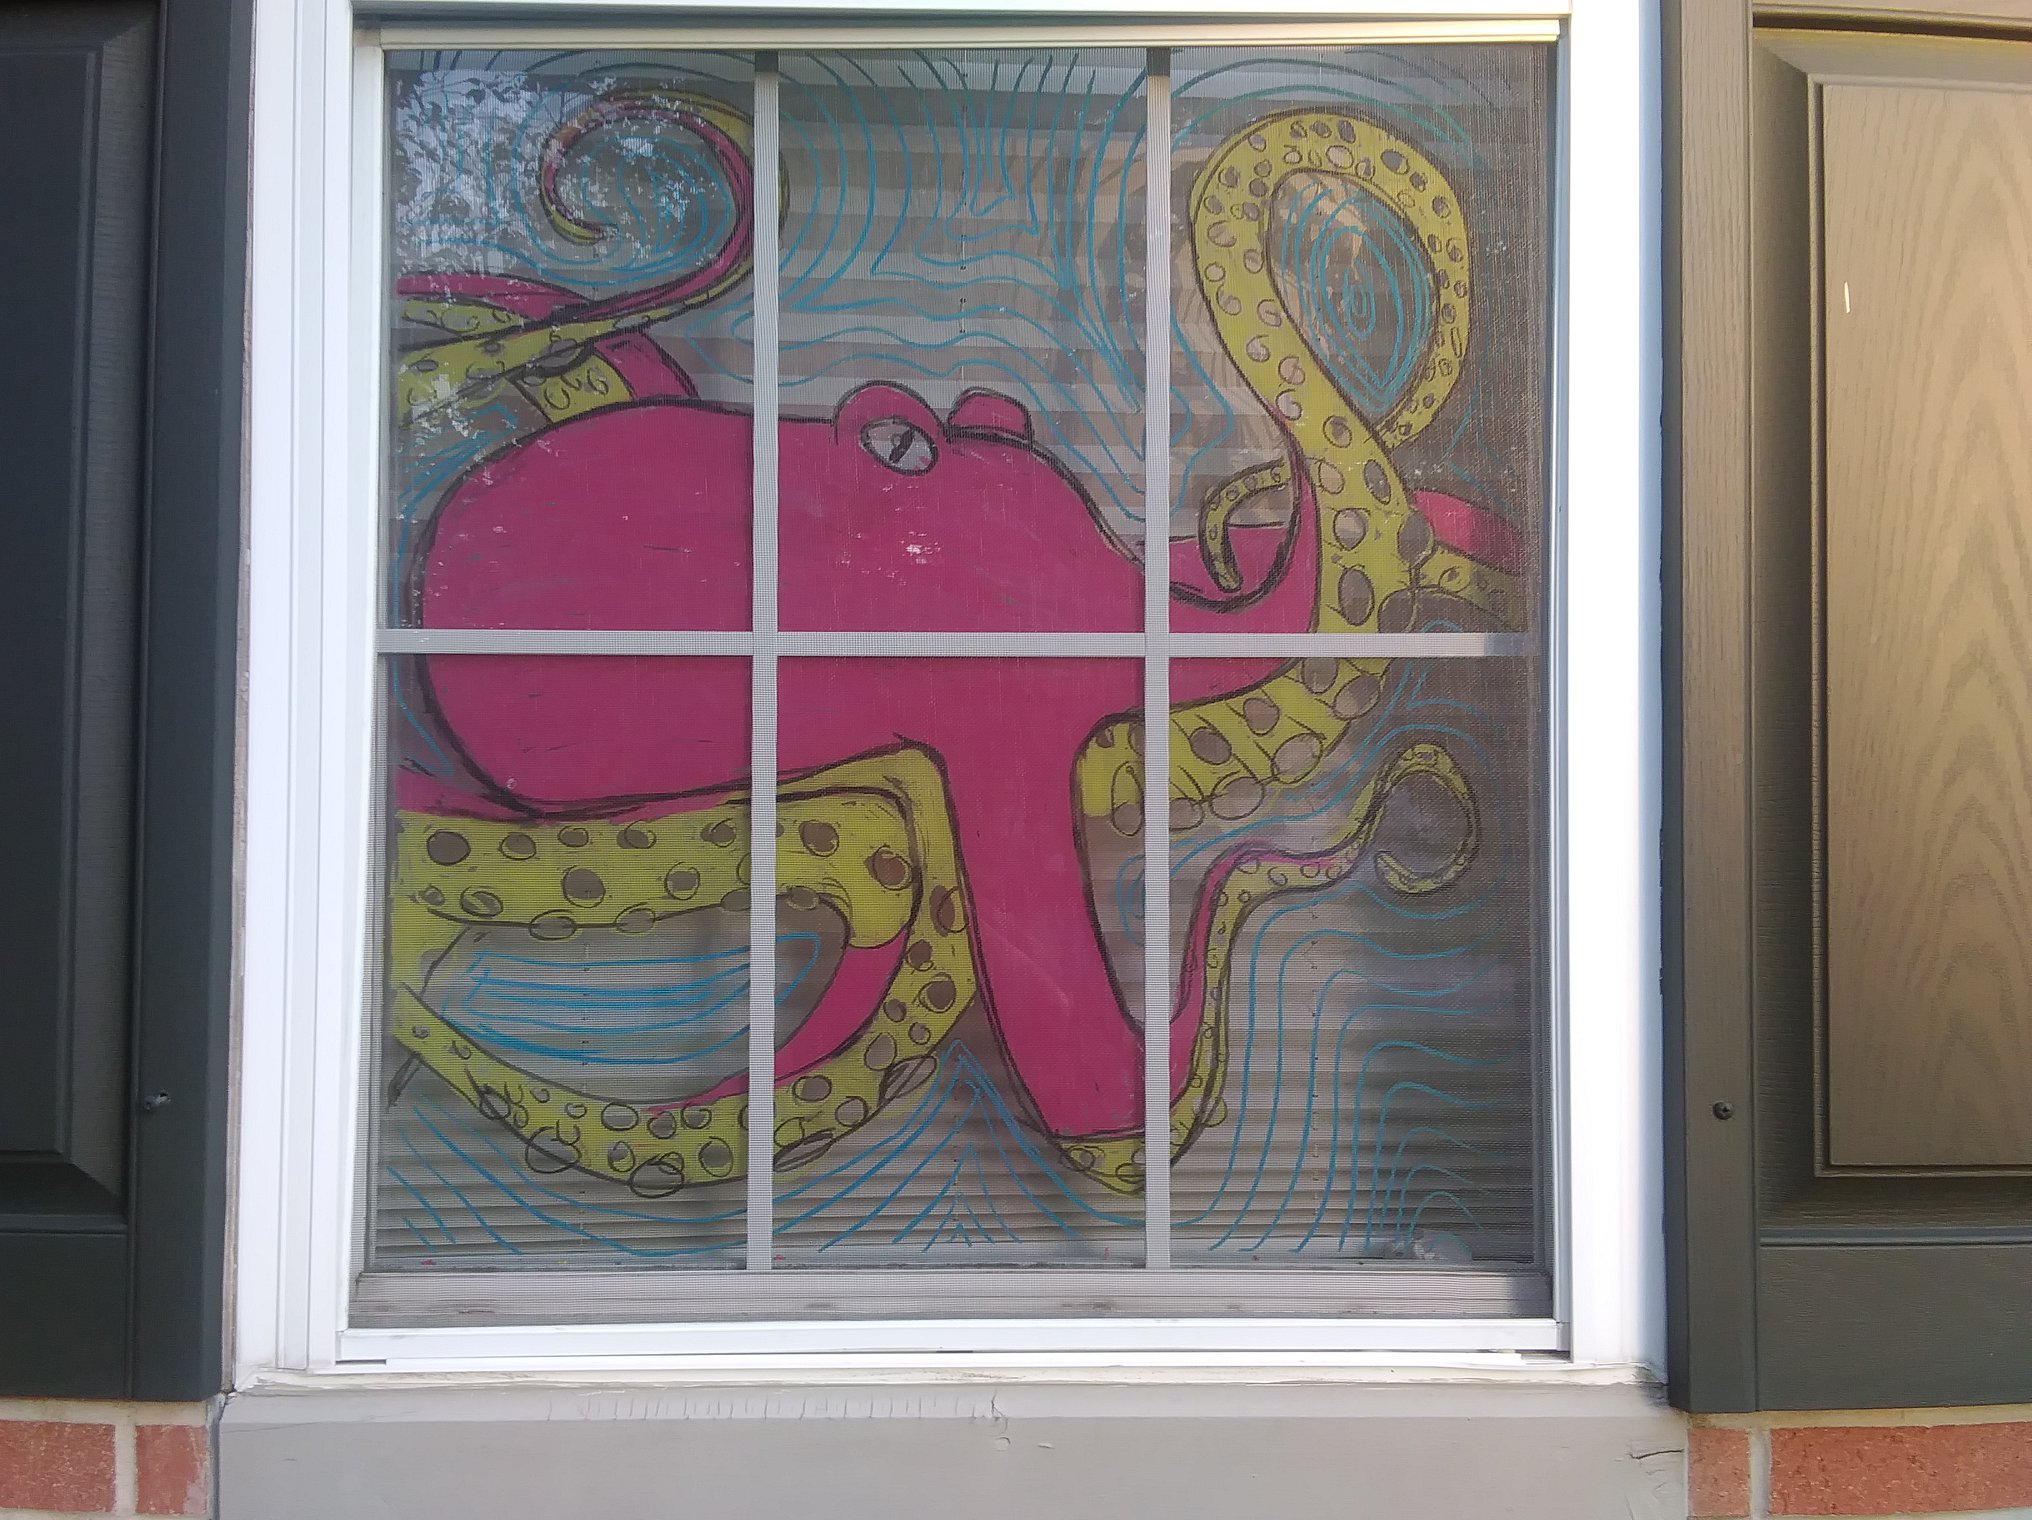 Window art by twelve-year-old Kaia M. from Plainfield, Illinois